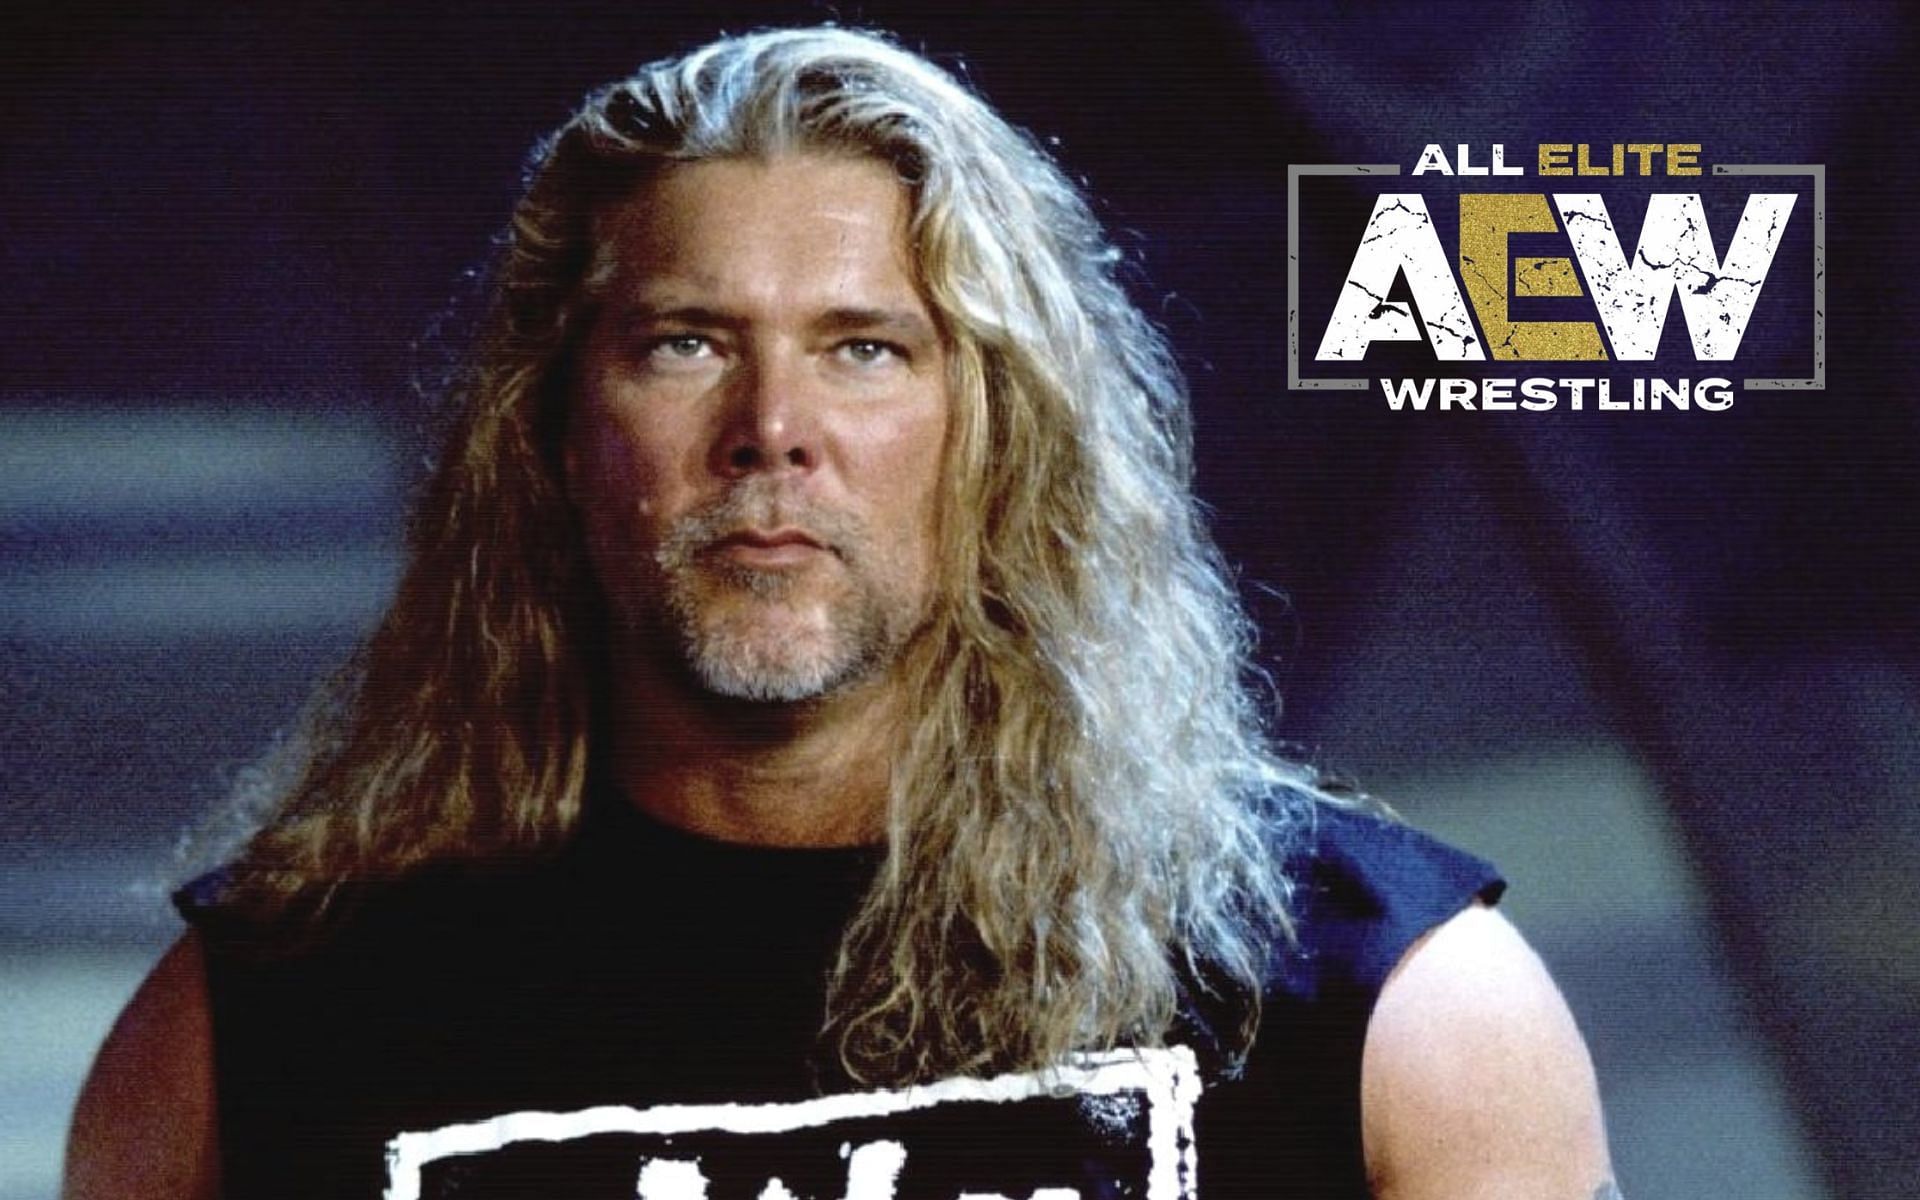 Kevin Nash was associated with WWE for nearly two decades